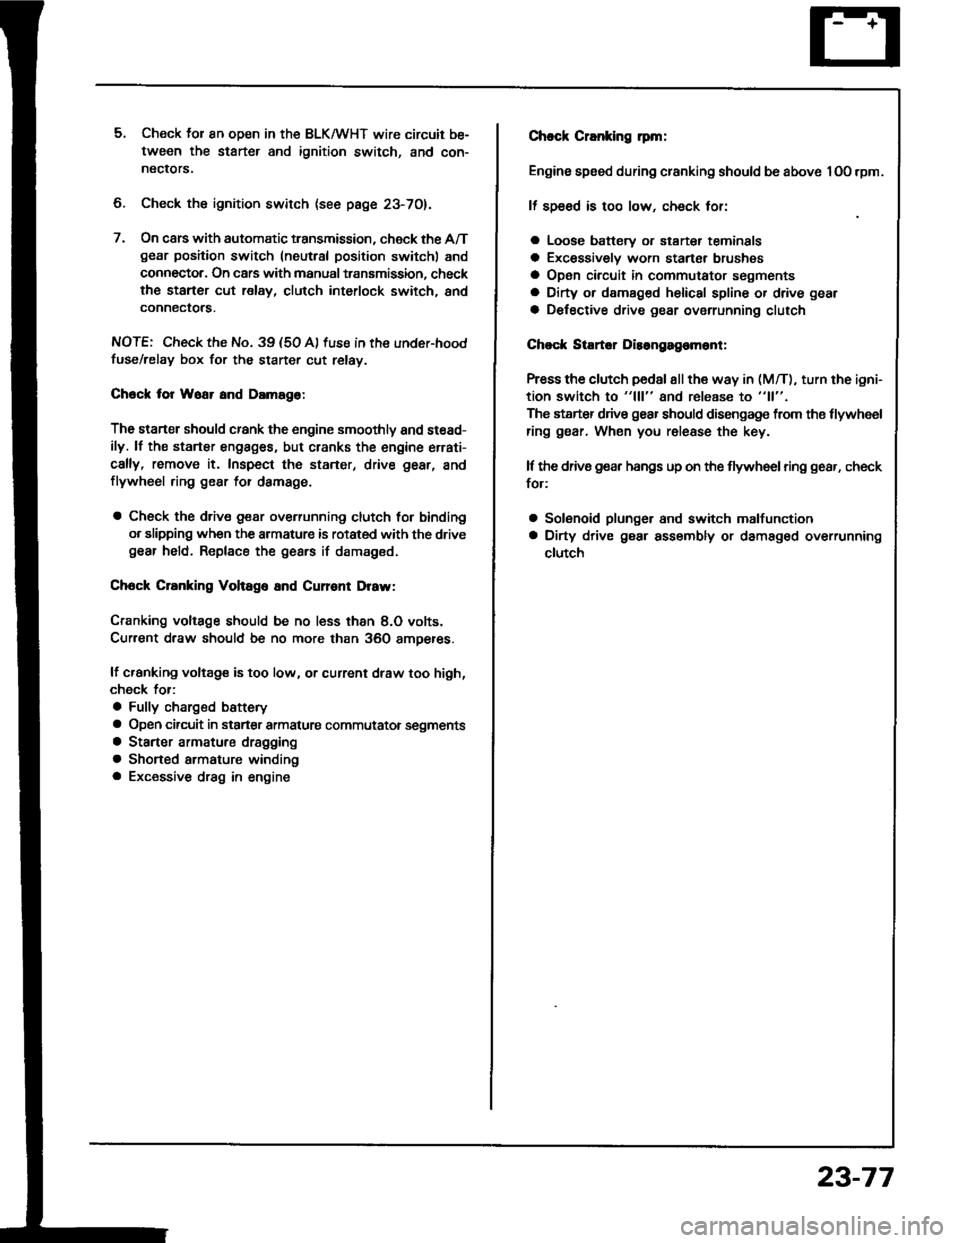 ACURA INTEGRA 1994  Service Service Manual 5. Check lor 8n op€n in the BLKMHT wire circuit be-
tween the staner and ignition switch, and con-
nectors.
6. Check the ignition switch (see page 23-70).
7, On cars with automatic transmission, che